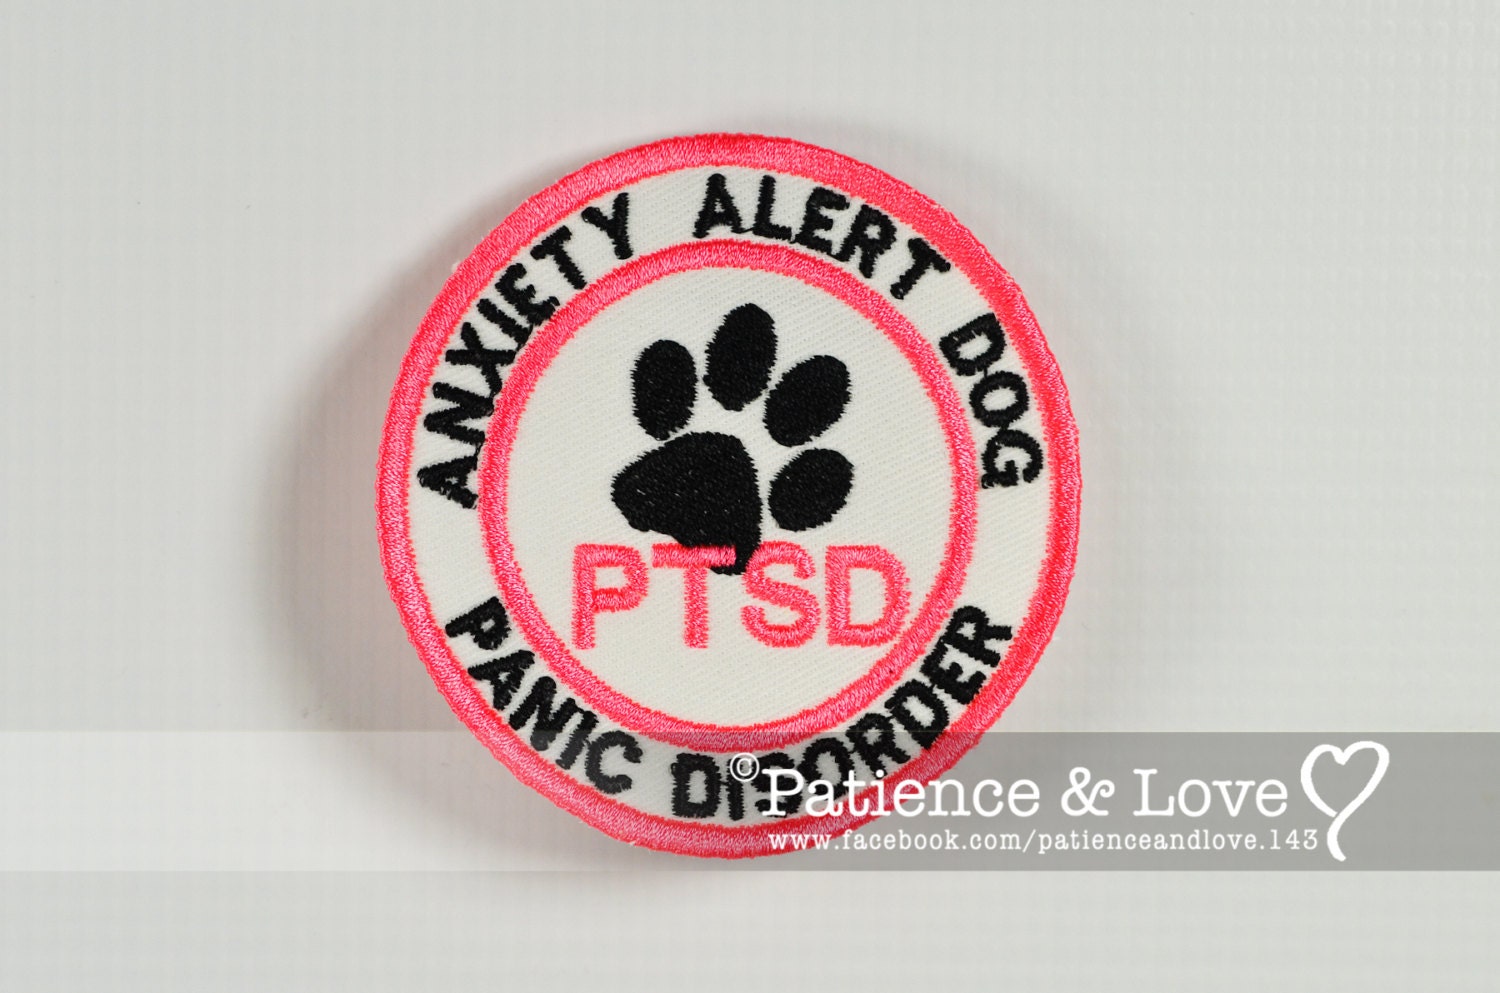 "ANXIETY ALERT DOG - PANIC DISORDER" around the top and bottom.  In the center it says PTSD with a paw print   As seen in the listing photo. The listing photo shows white fabric, pink (1909) for the PTSD and edge, black text.